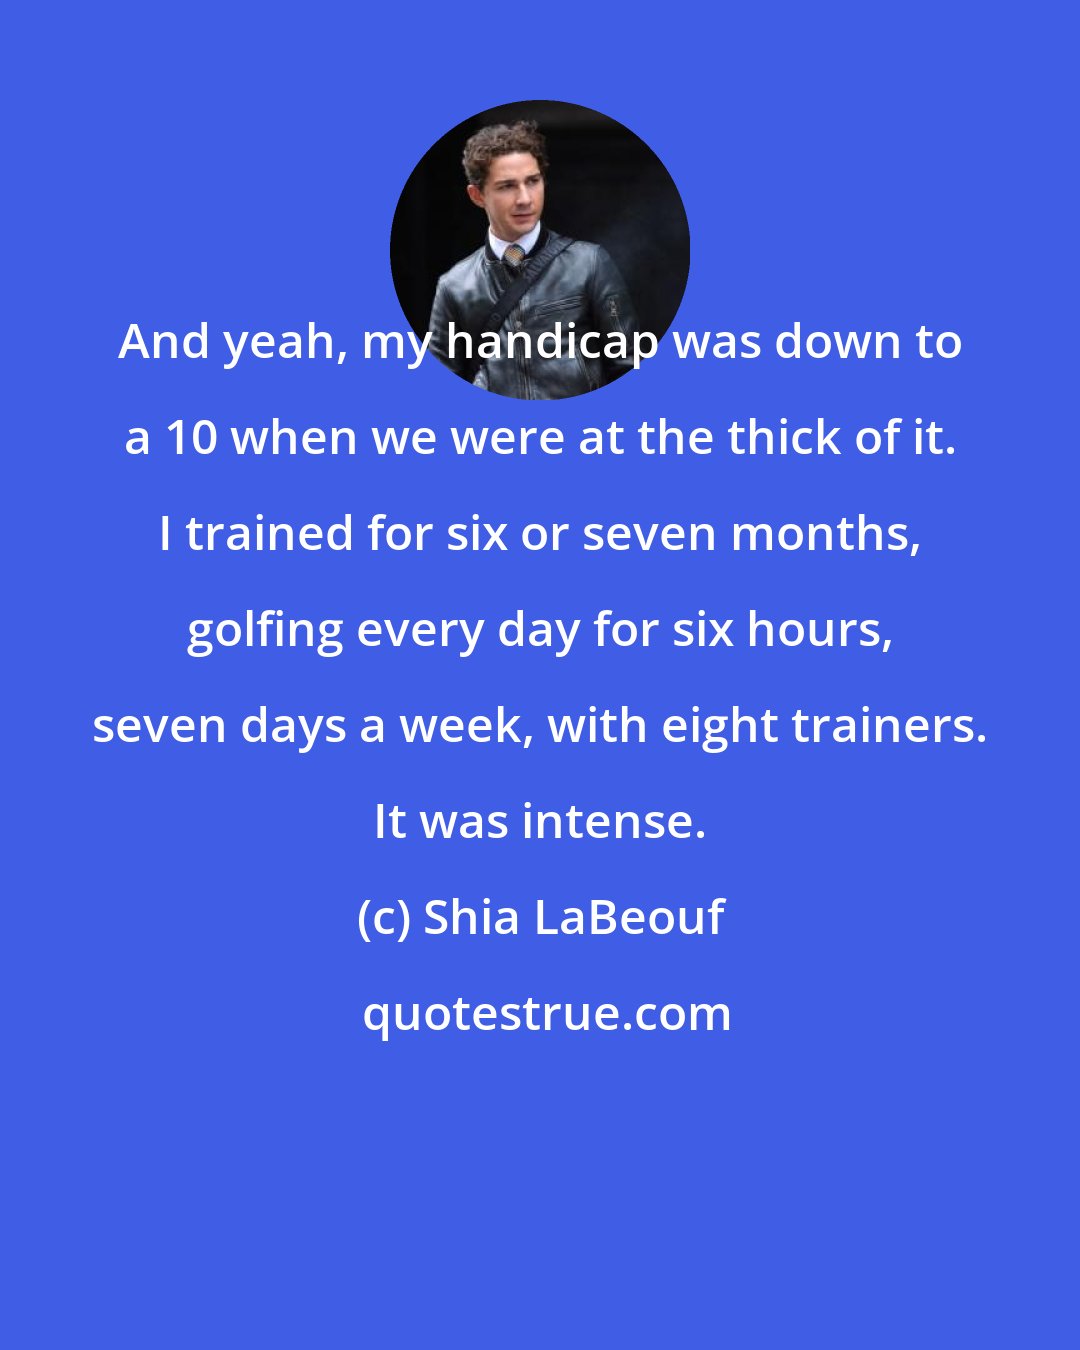 Shia LaBeouf: And yeah, my handicap was down to a 10 when we were at the thick of it. I trained for six or seven months, golfing every day for six hours, seven days a week, with eight trainers. It was intense.